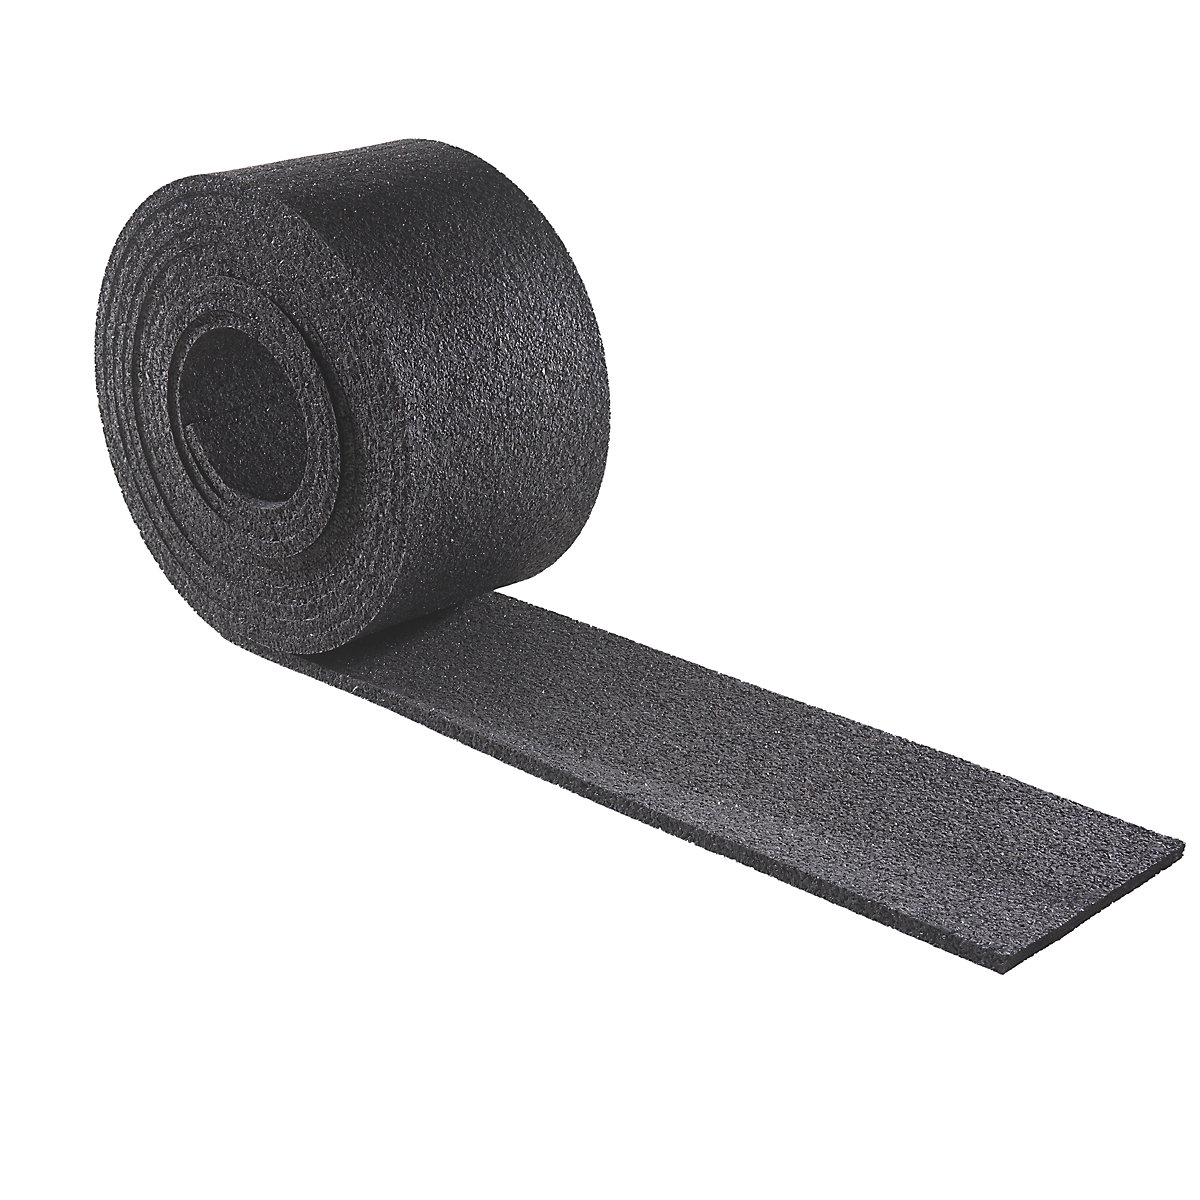 MT non-slip mat, for securing loads, LxW 5000 x 125 mm, pack of 2, 3+ packs-1